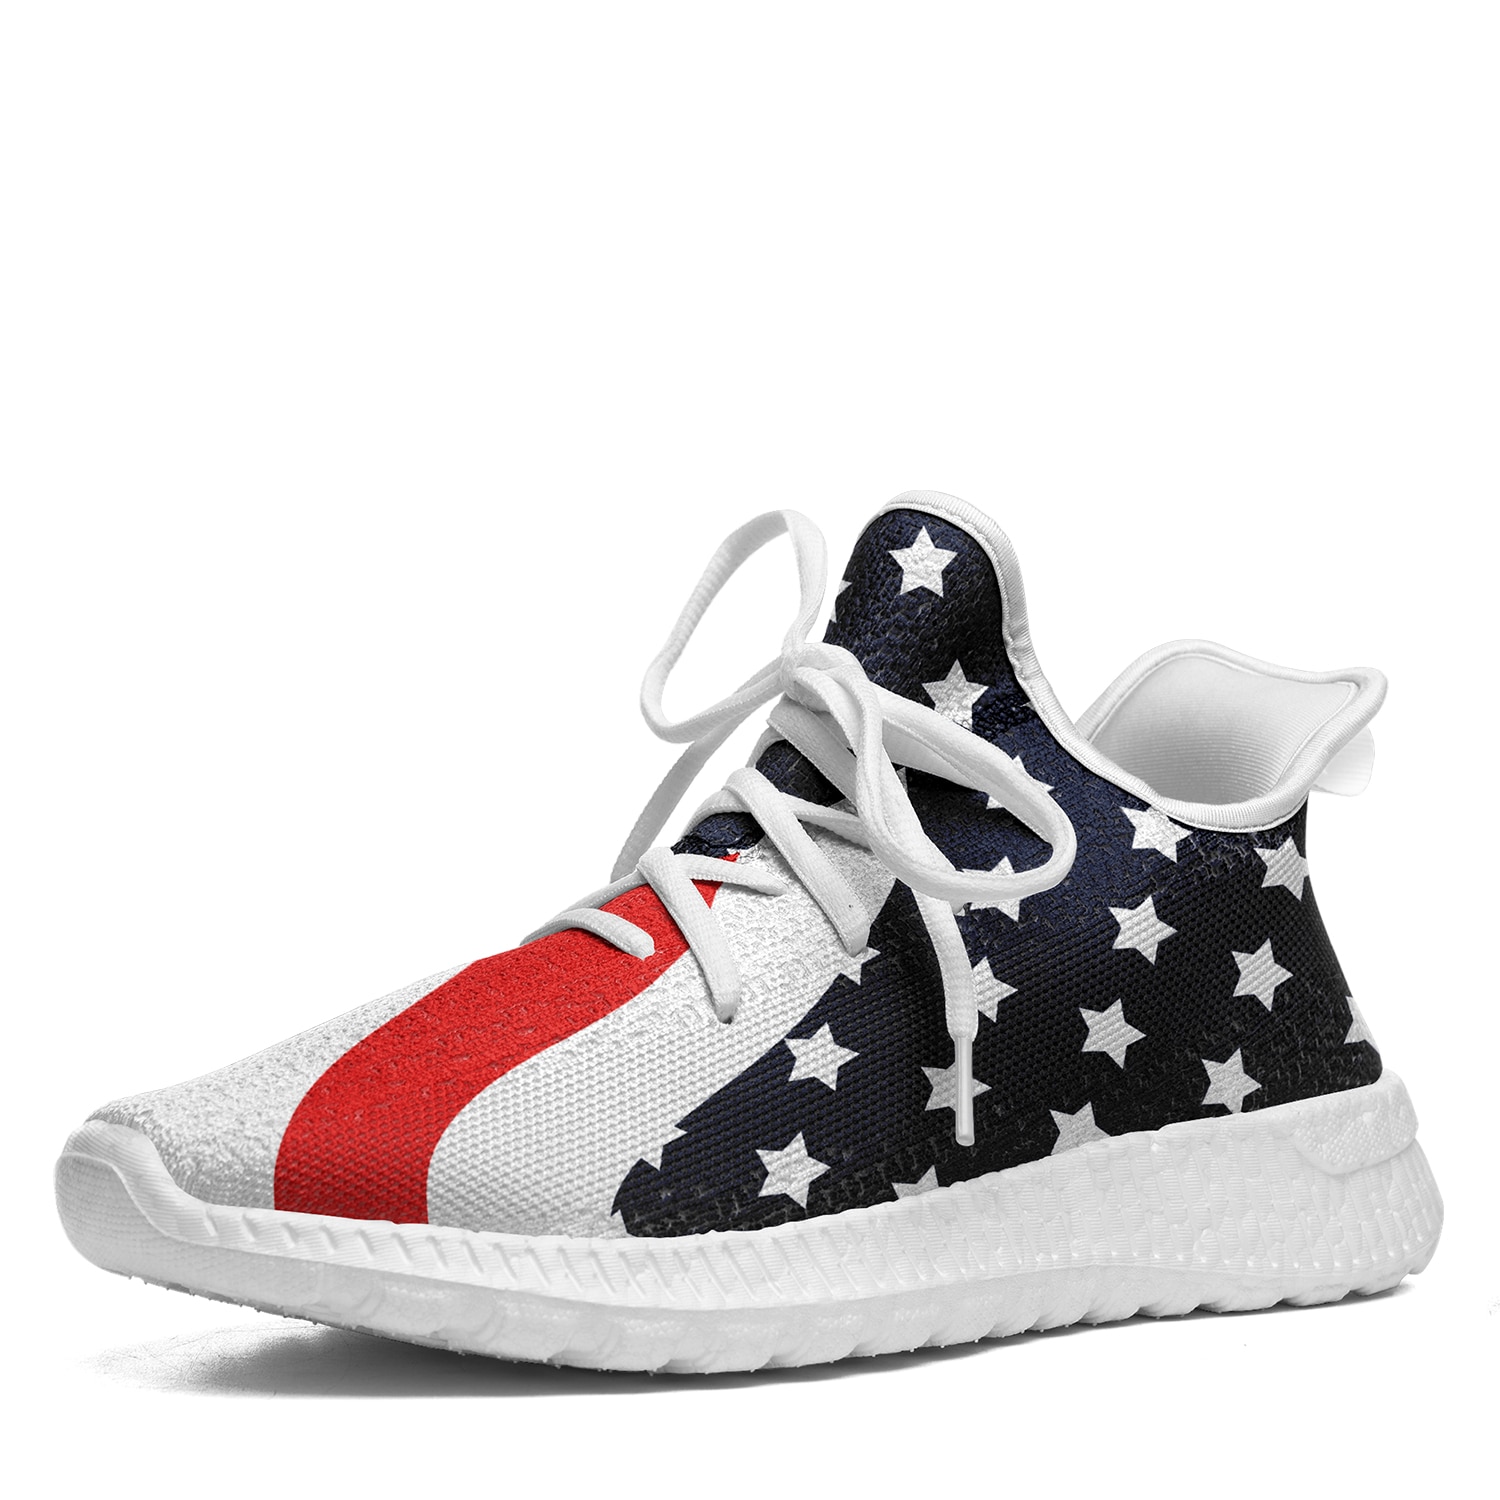 USA America Flag Shoes Athletic Running Walking Shoes Drop shipping Patriotic Print On Demand Slip-on Mens Lightweight Sneakers